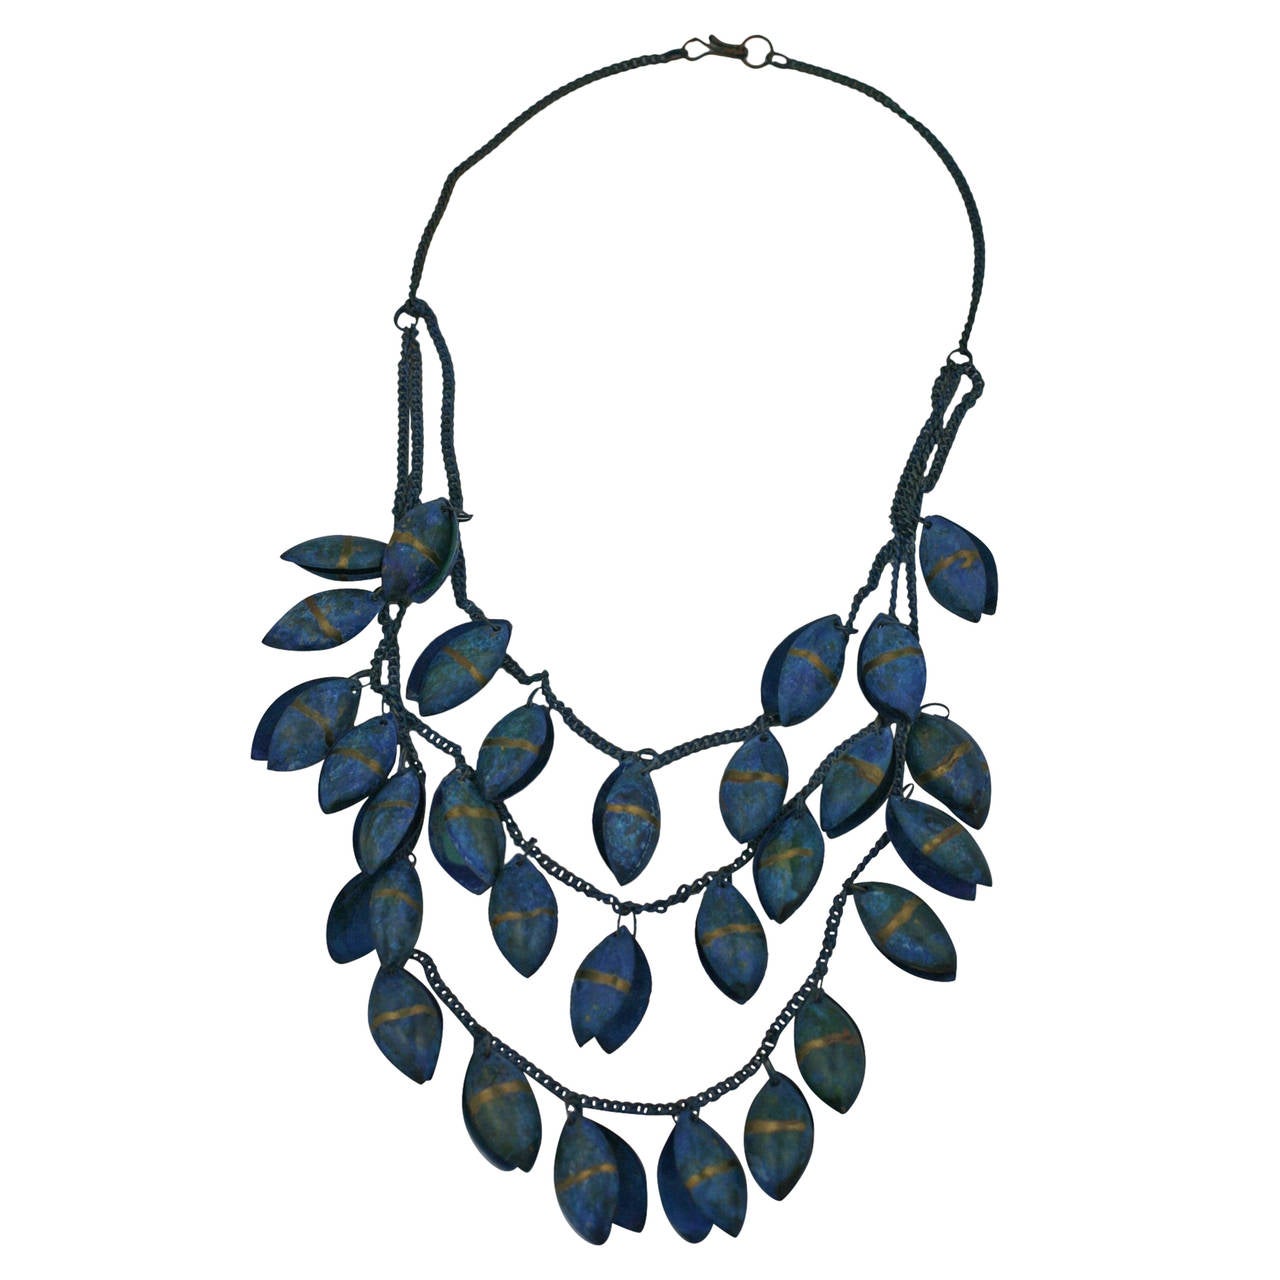 Layered Patinaed Pod Necklace